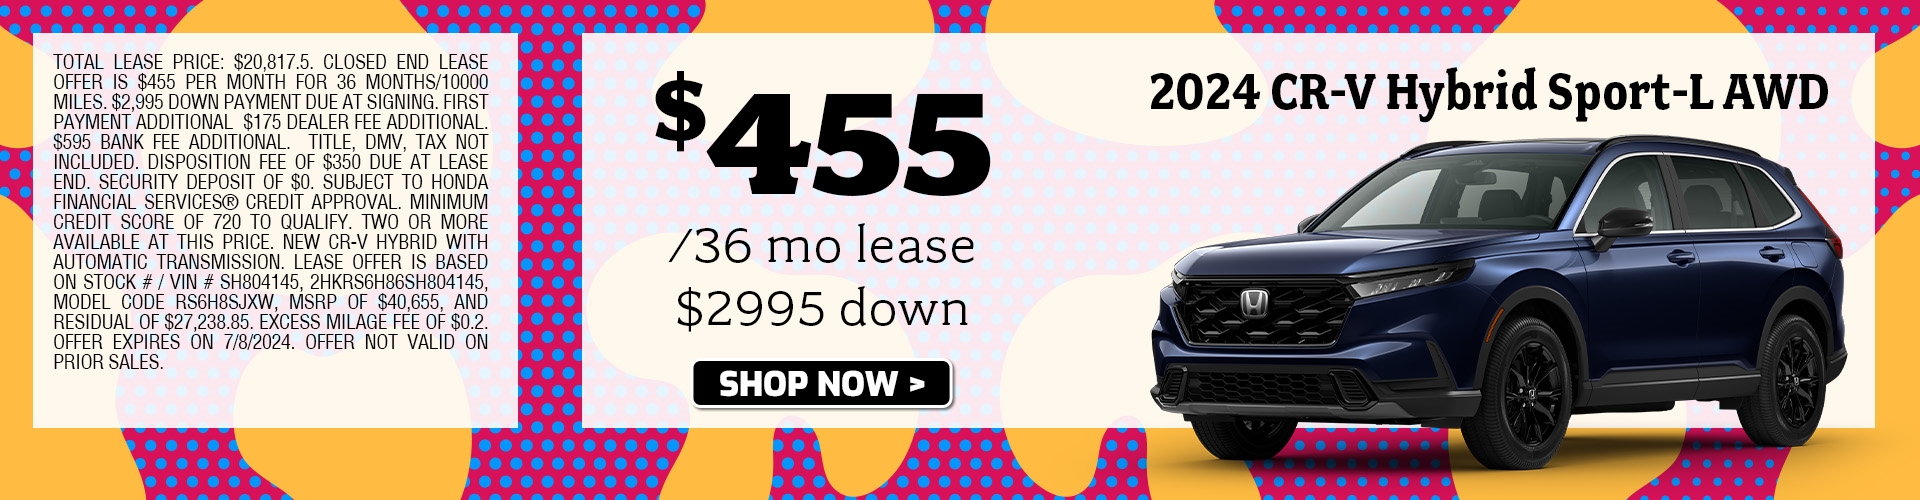 cr-v lease special